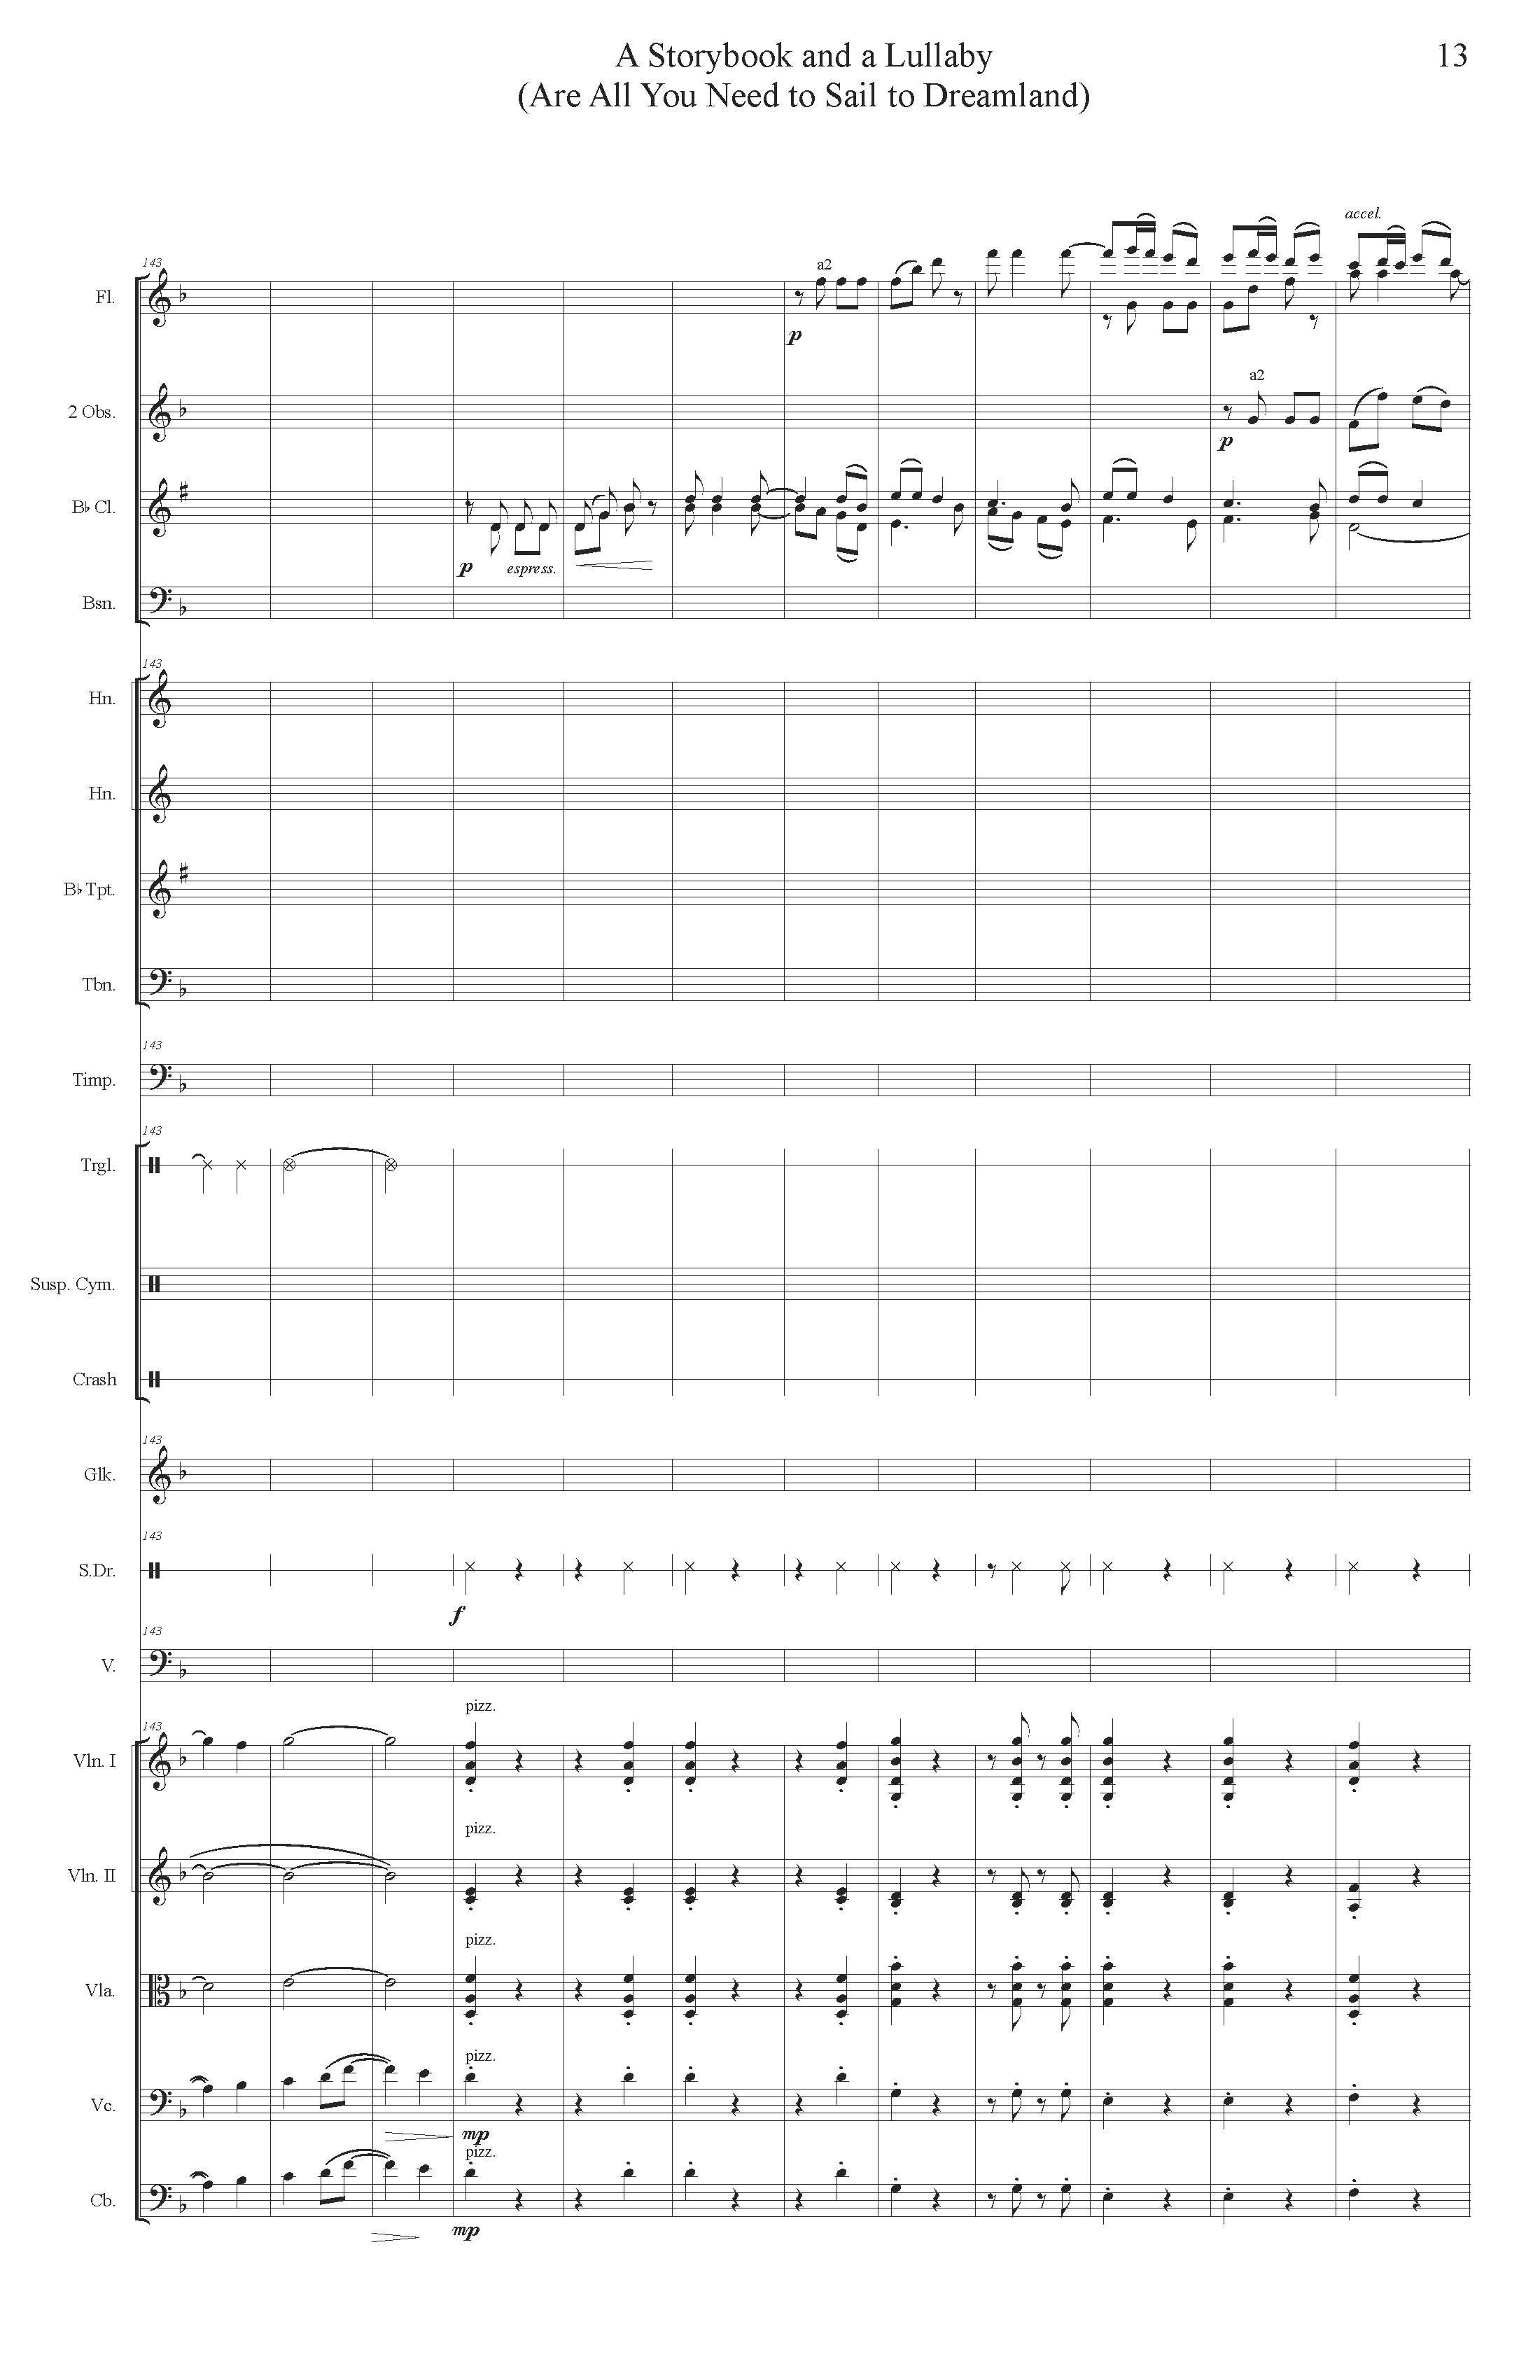 A STORYBOOK AND A LULLABY ORCH - Score_Page_13.jpg